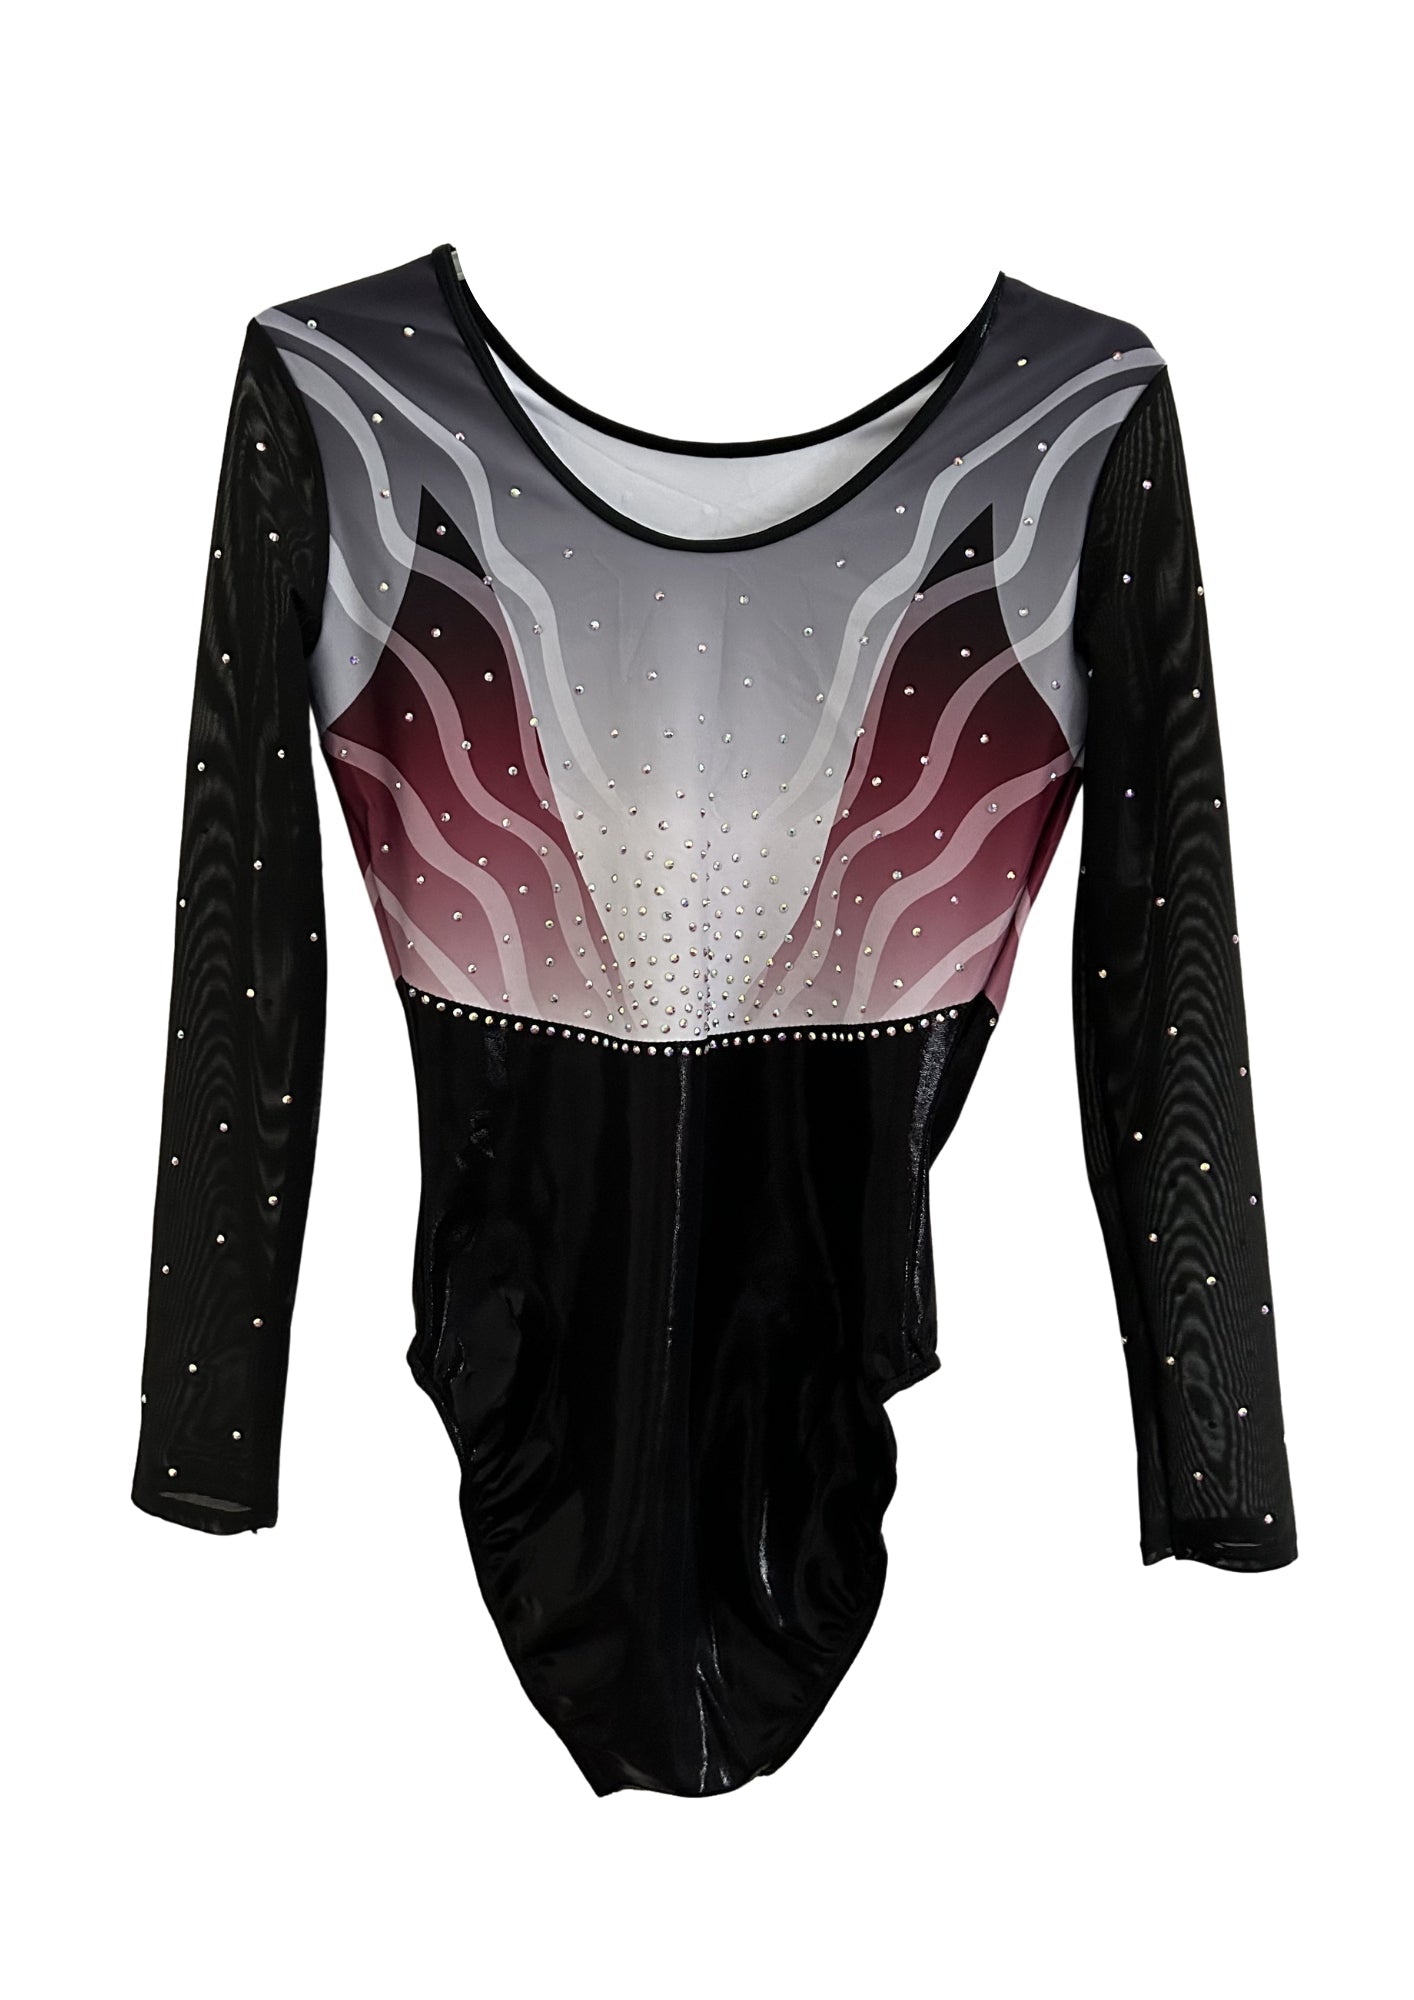 Gymnastics leotard for competition and training, cheap, comfortable, shiny. 